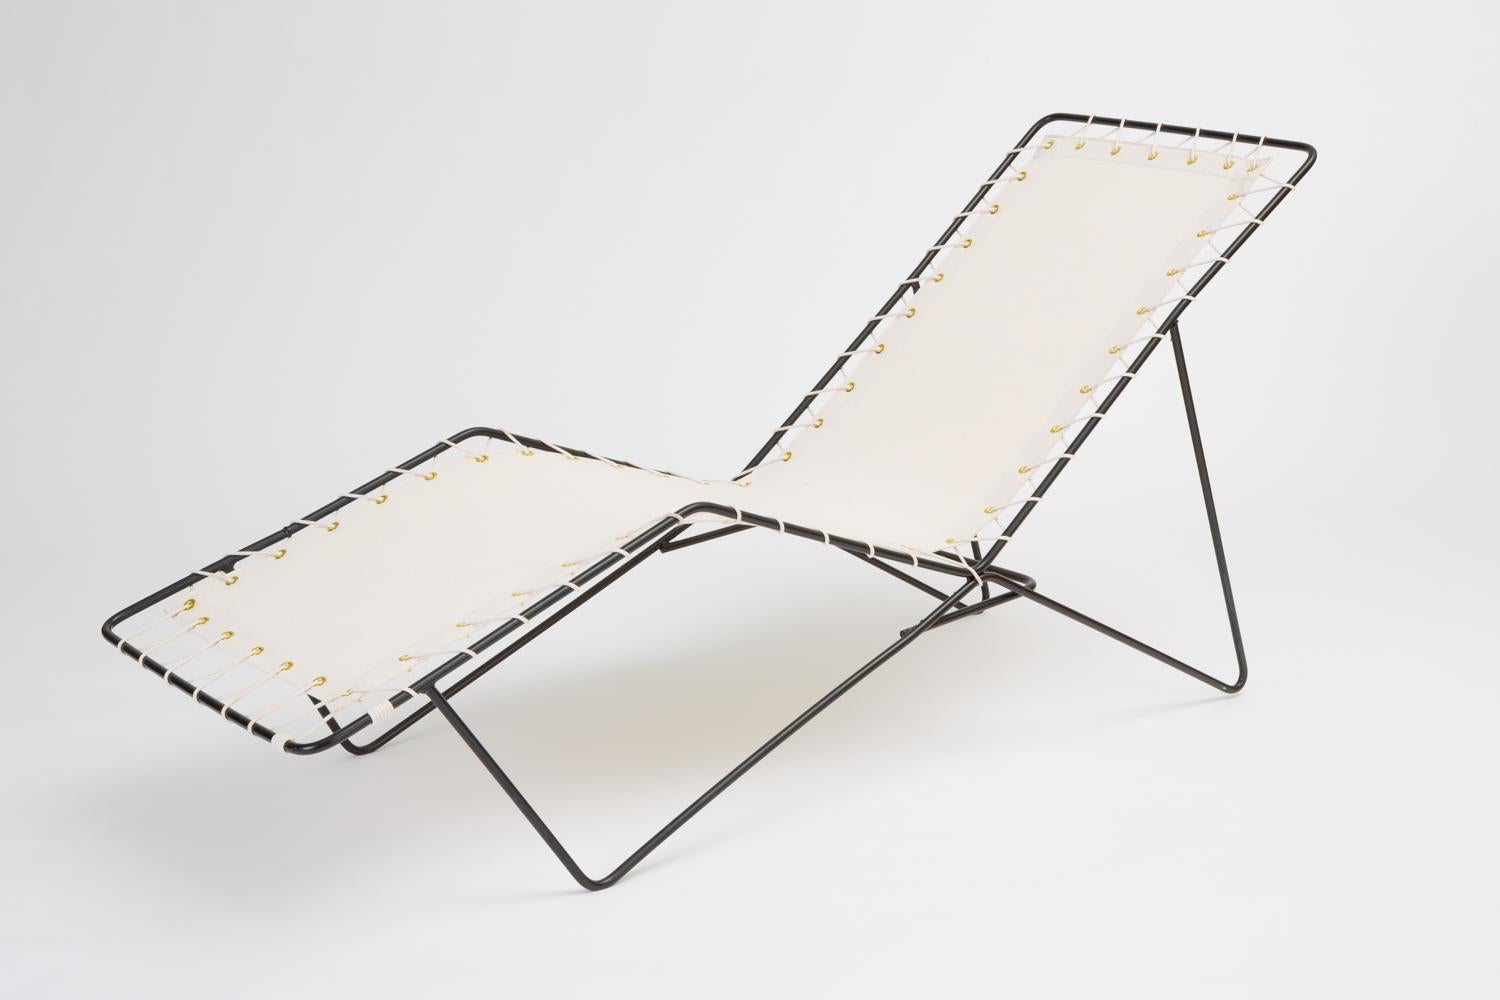 A 1950s modernist patio chaise lounge similar to Pipsan Saarinen Swanson’s 